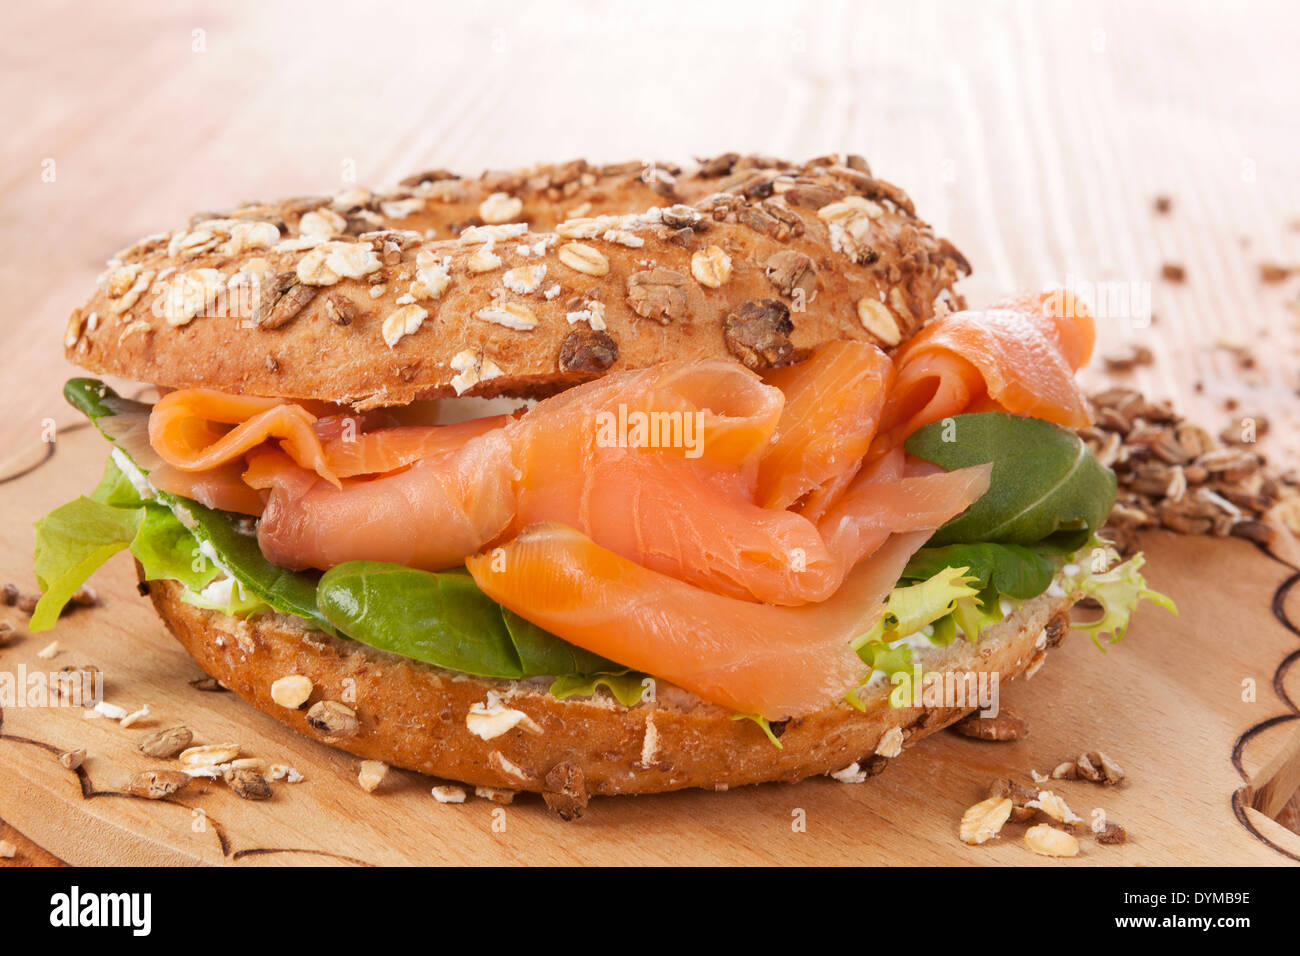 Whole grain bagel with smoked salmon on wooden background. Culinary healthy bagel eating. Stock Photo